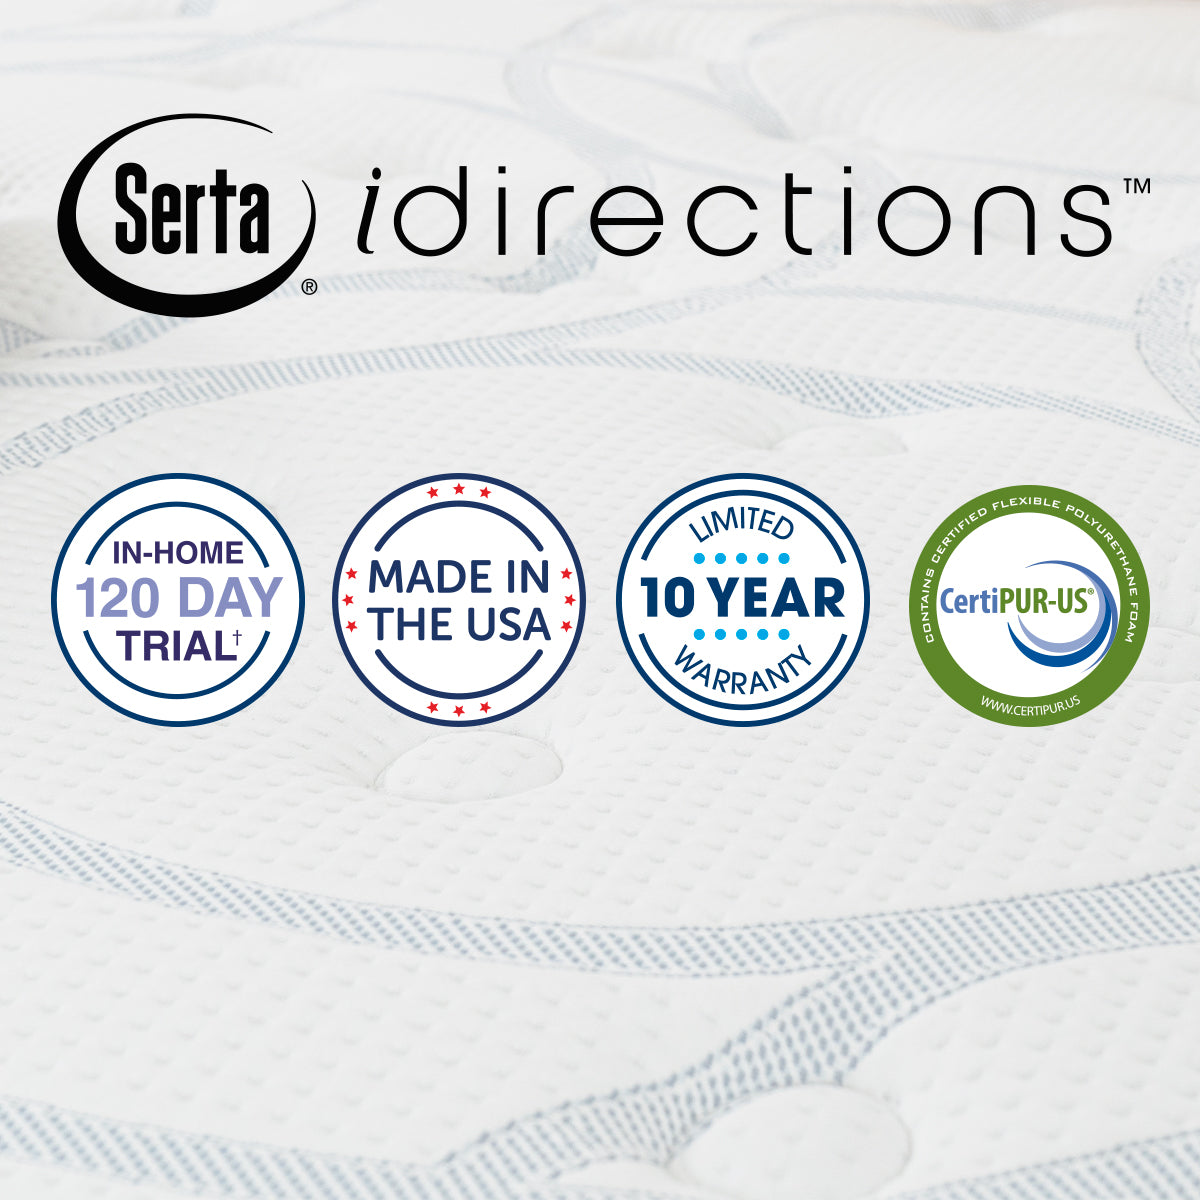 Serta iDirections X1 Hybrid II Firm Mattress Product Features: In-Home 120 Day Trial, Made in the USA, Limited 10 Year Warranty, CertiPUR-US Certified